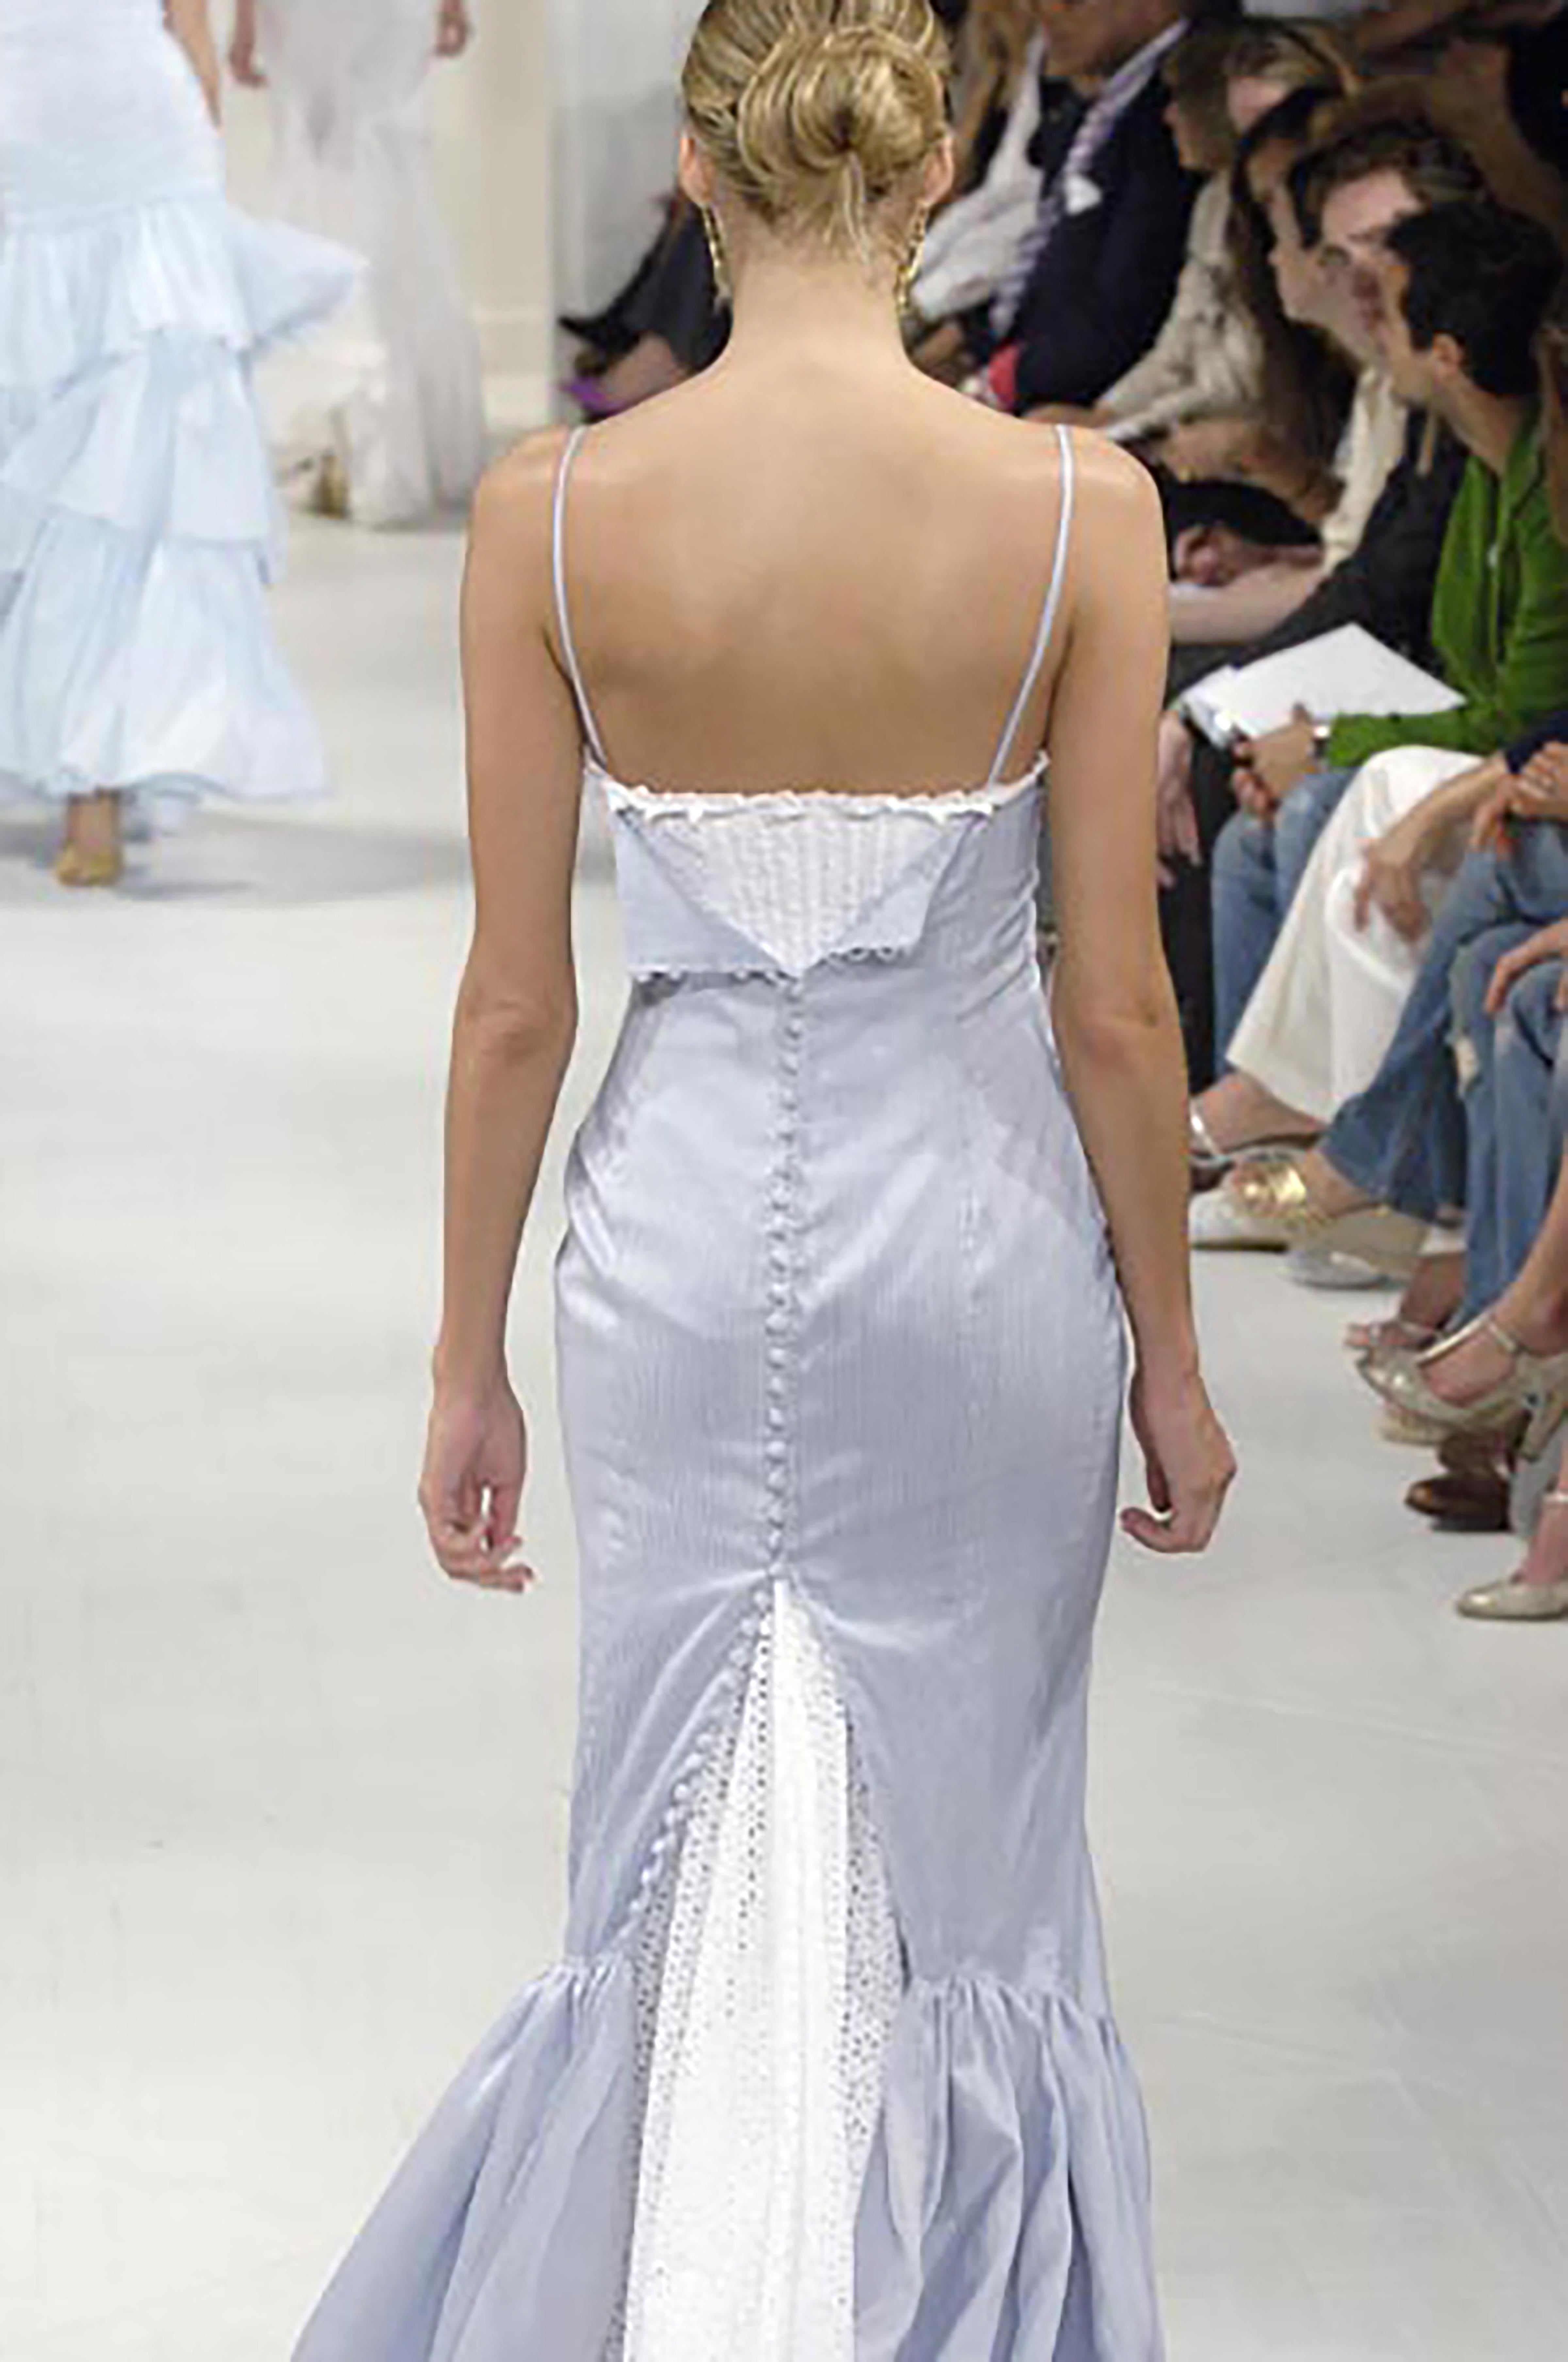 S/S 2006 Ralph Lauren Pinstriped Blue and White Lace Trim Gown 4